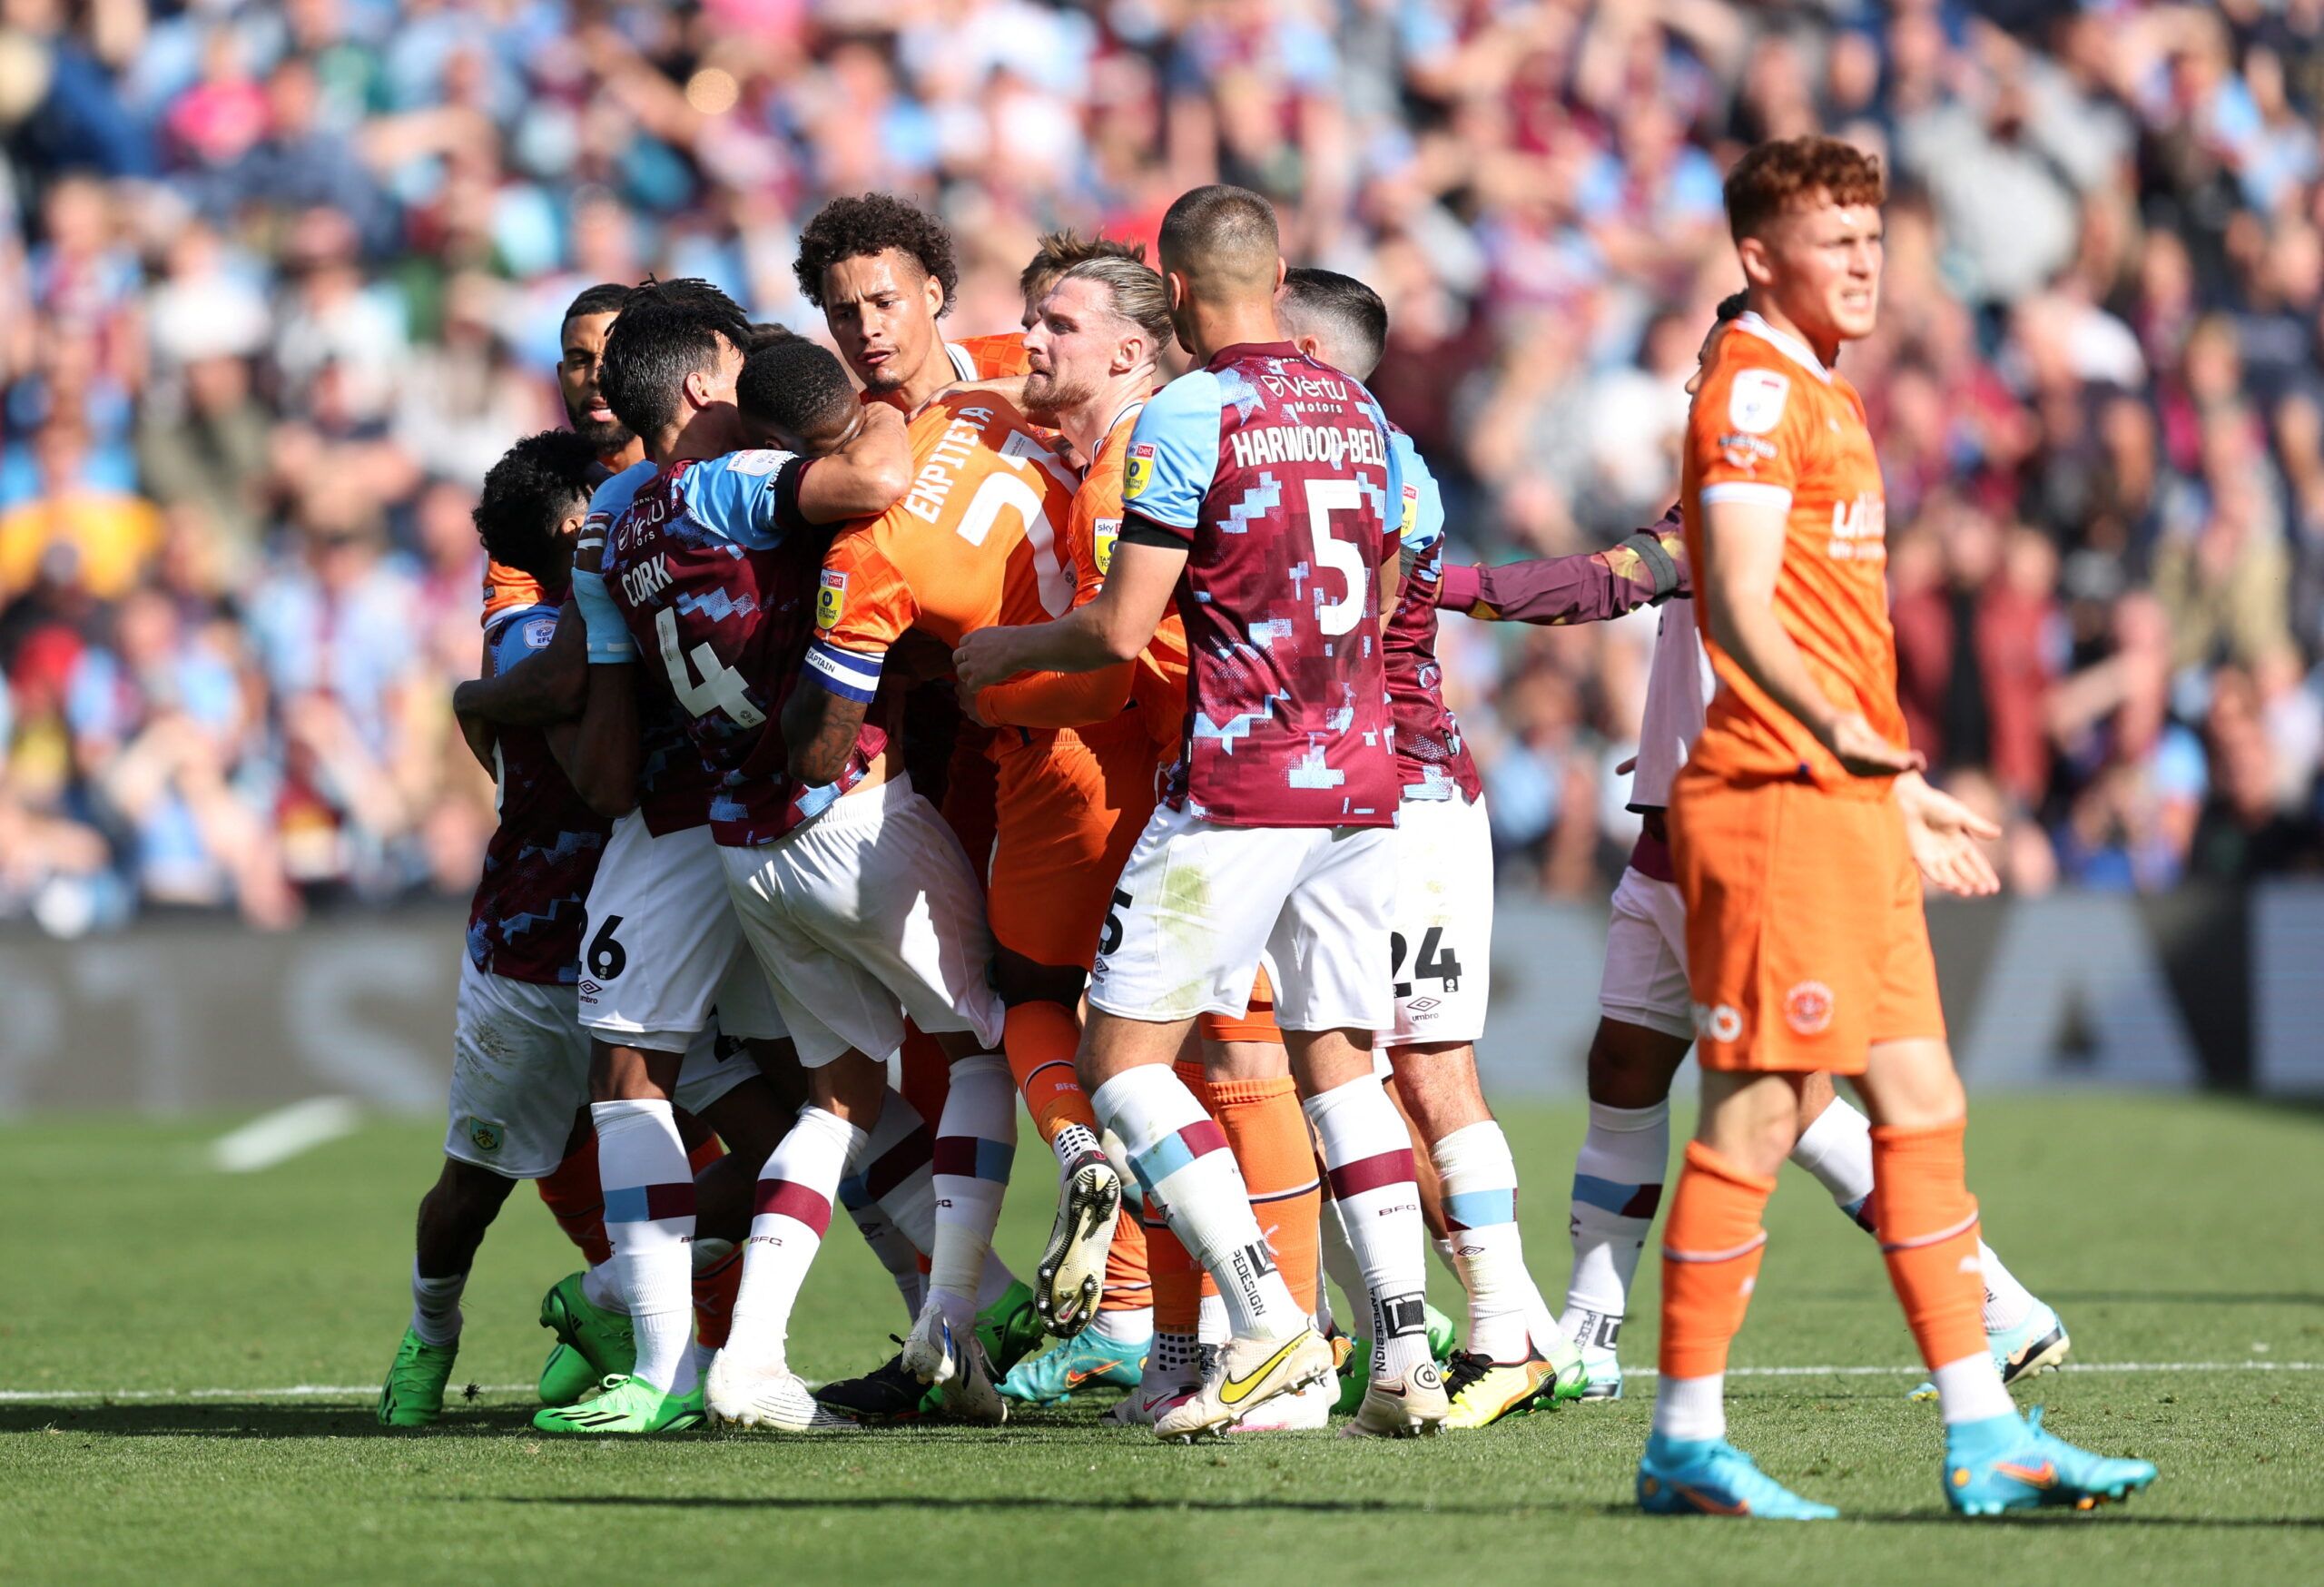 Soccer Football - Championship - Burnley v Blackpool - Turf Moor, Burnley, Britain - August 20, 2022 Burnley and Blackpool players clash during the match Action Images/John Clifton  EDITORIAL USE ONLY. No use with unauthorized audio, video, data, fixture lists, club/league logos or 